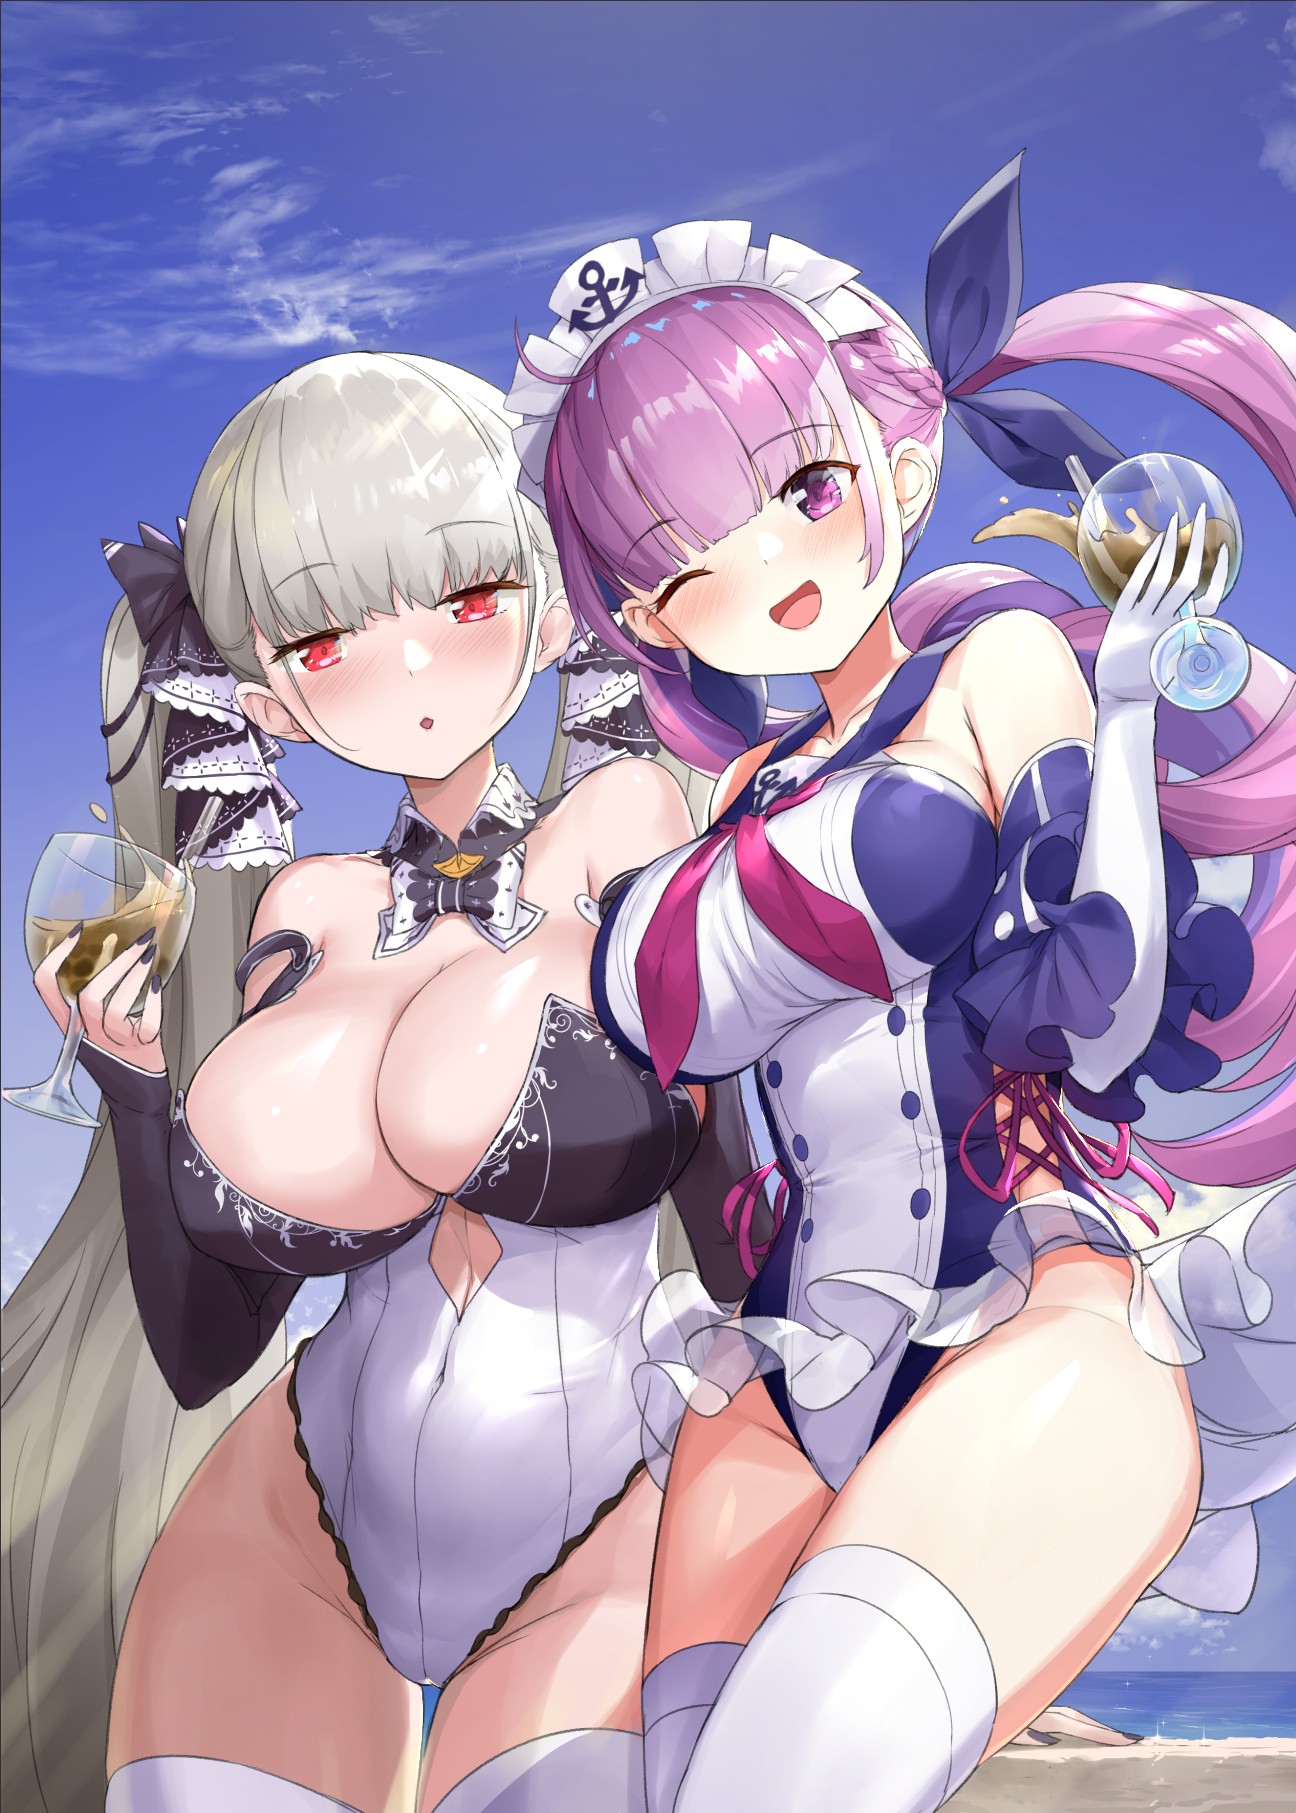 Anime 1296x1813 anime anime girls digital art artwork 2D portrait display Azur Lane Hololive crossover Formidable (Azur Lane) Minato Aqua Virtual Youtuber Crystal Shoujo big boobs one-piece swimsuit cleavage thigh-highs twintails long hair silver hair purple hair cocktails wink two women